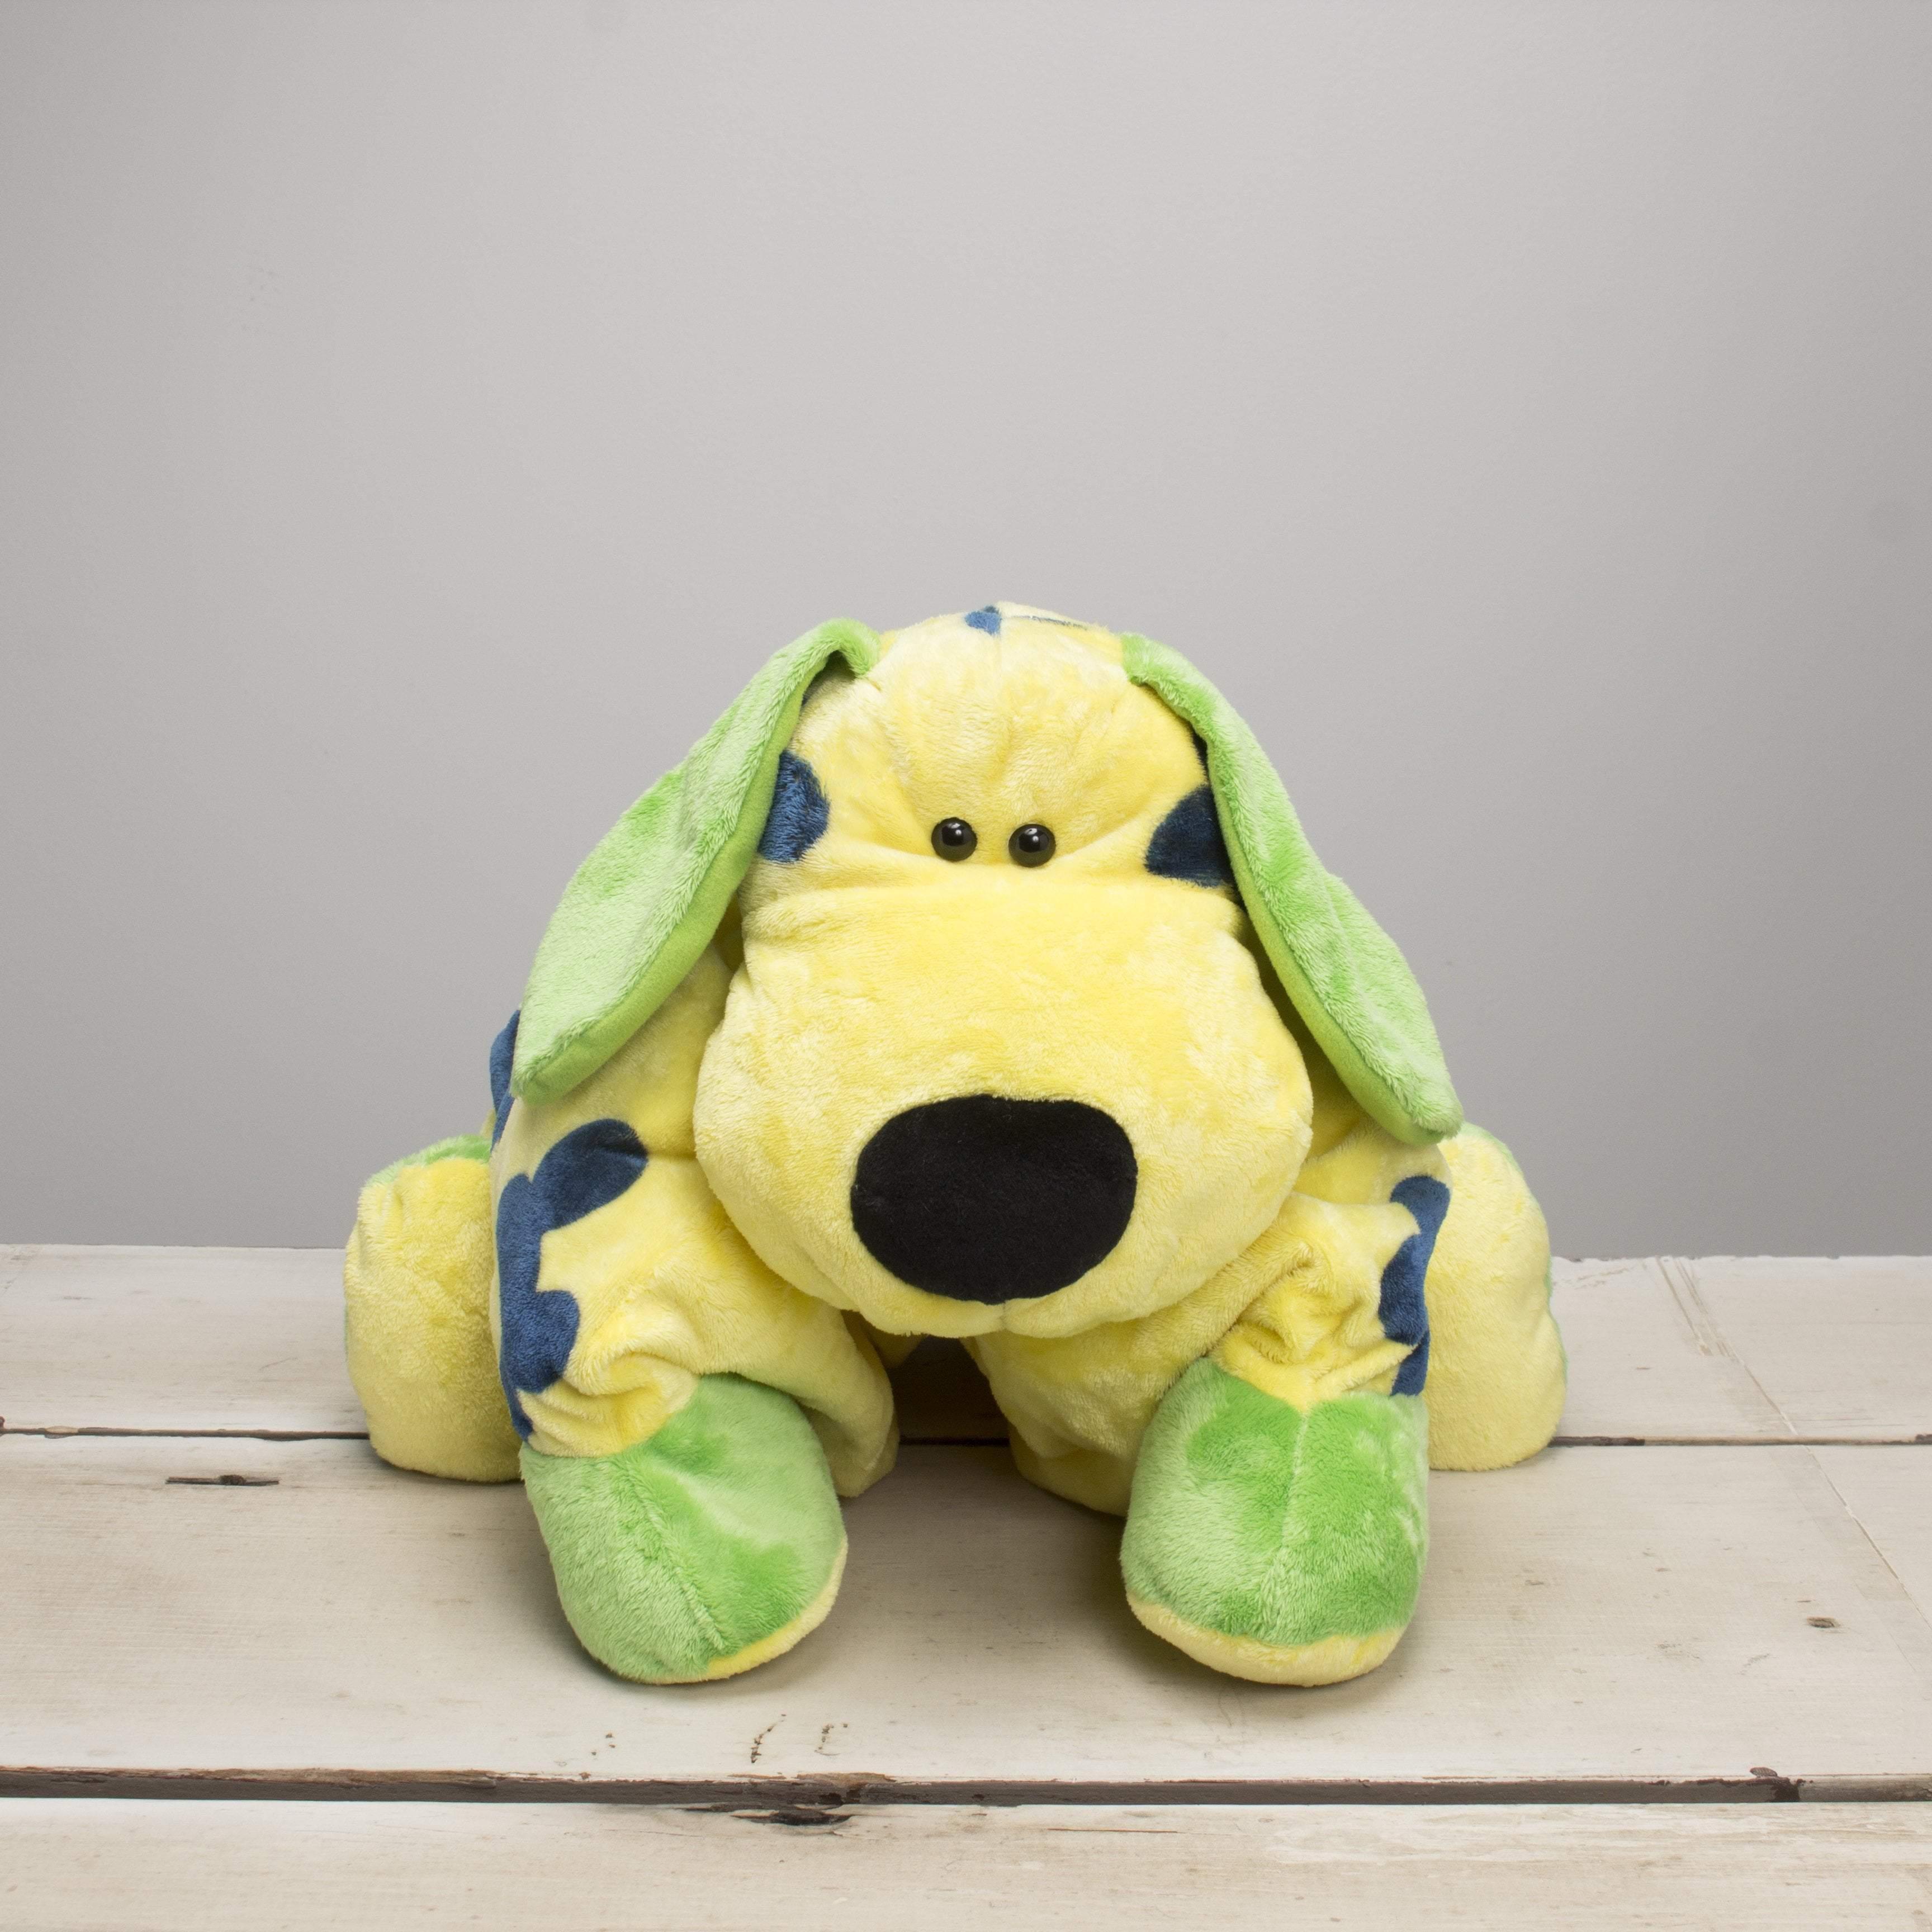 Plush "Duncan" the 20in Puppy Dog Pillow by Russ Berrie